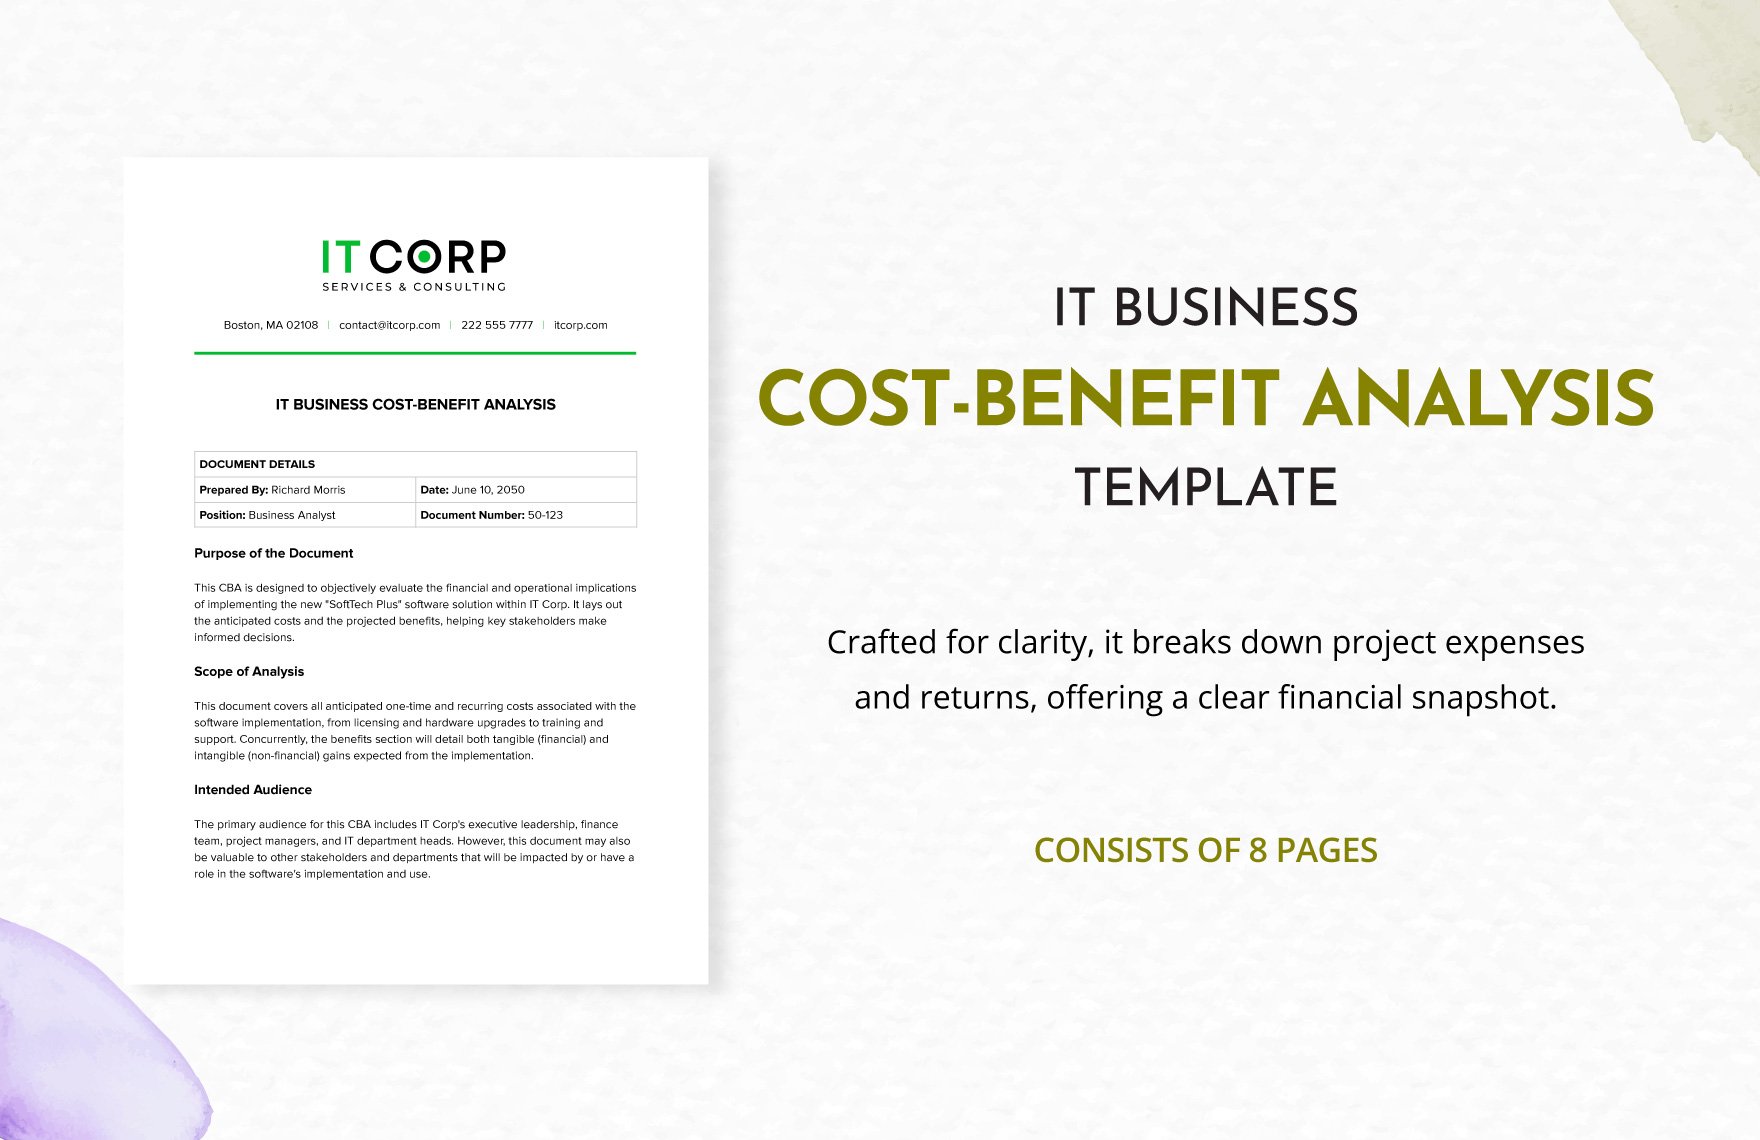 IT Business Cost-Benefit Analysis Template